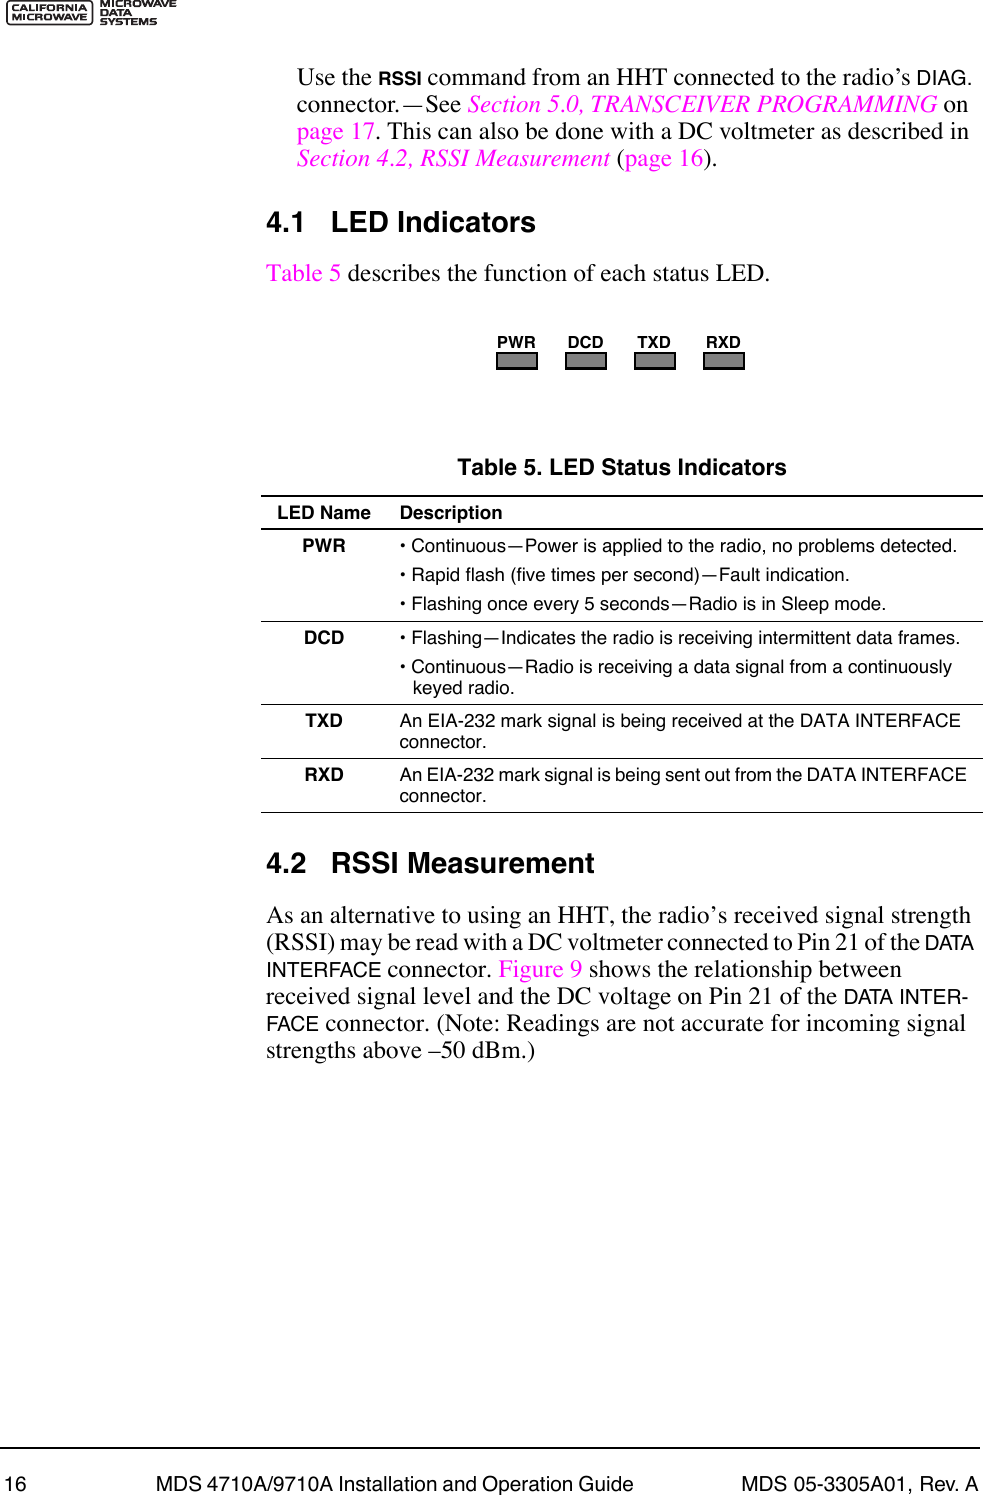 16 MDS 4710A/9710A Installation and Operation Guide  MDS 05-3305A01, Rev. AUse the RSSI command from an HHT connected to the radioÕs DIAG. connector.ÑSee Section 5.0, TRANSCEIVER PROGRAMMING on page 17. This can also be done with a DC voltmeter as described in Section 4.2, RSSI Measurement (page 16).4.1 LED IndicatorsTable 5 describes the function of each status LED.4.2 RSSI MeasurementAs an alternative to using an HHT, the radioÕs received signal strength (RSSI) may be read with a DC voltmeter connected to Pin 21 of the DATA INTERFACE connector. Figure 9 shows the relationship between received signal level and the DC voltage on Pin 21 of the DATA INTER-FACE connector. (Note: Readings are not accurate for incoming signal strengths above Ð50 dBm.)PWR DCD TXD RXDTable 5. LED Status Indicators LED Name DescriptionPWR ¥ ContinuousÑPower is applied to the radio, no problems detected.¥ Rapid flash (five times per second)ÑFault indication.¥ Flashing once every 5 secondsÑRadio is in Sleep mode.DCD ¥ FlashingÑIndicates the radio is receiving intermittent data frames.¥ ContinuousÑRadio is receiving a data signal from a continuously keyed radio.TXD An EIA-232 mark signal is being received at the DATA INTERFACE connector.RXD An EIA-232 mark signal is being sent out from the DATA INTERFACE connector.